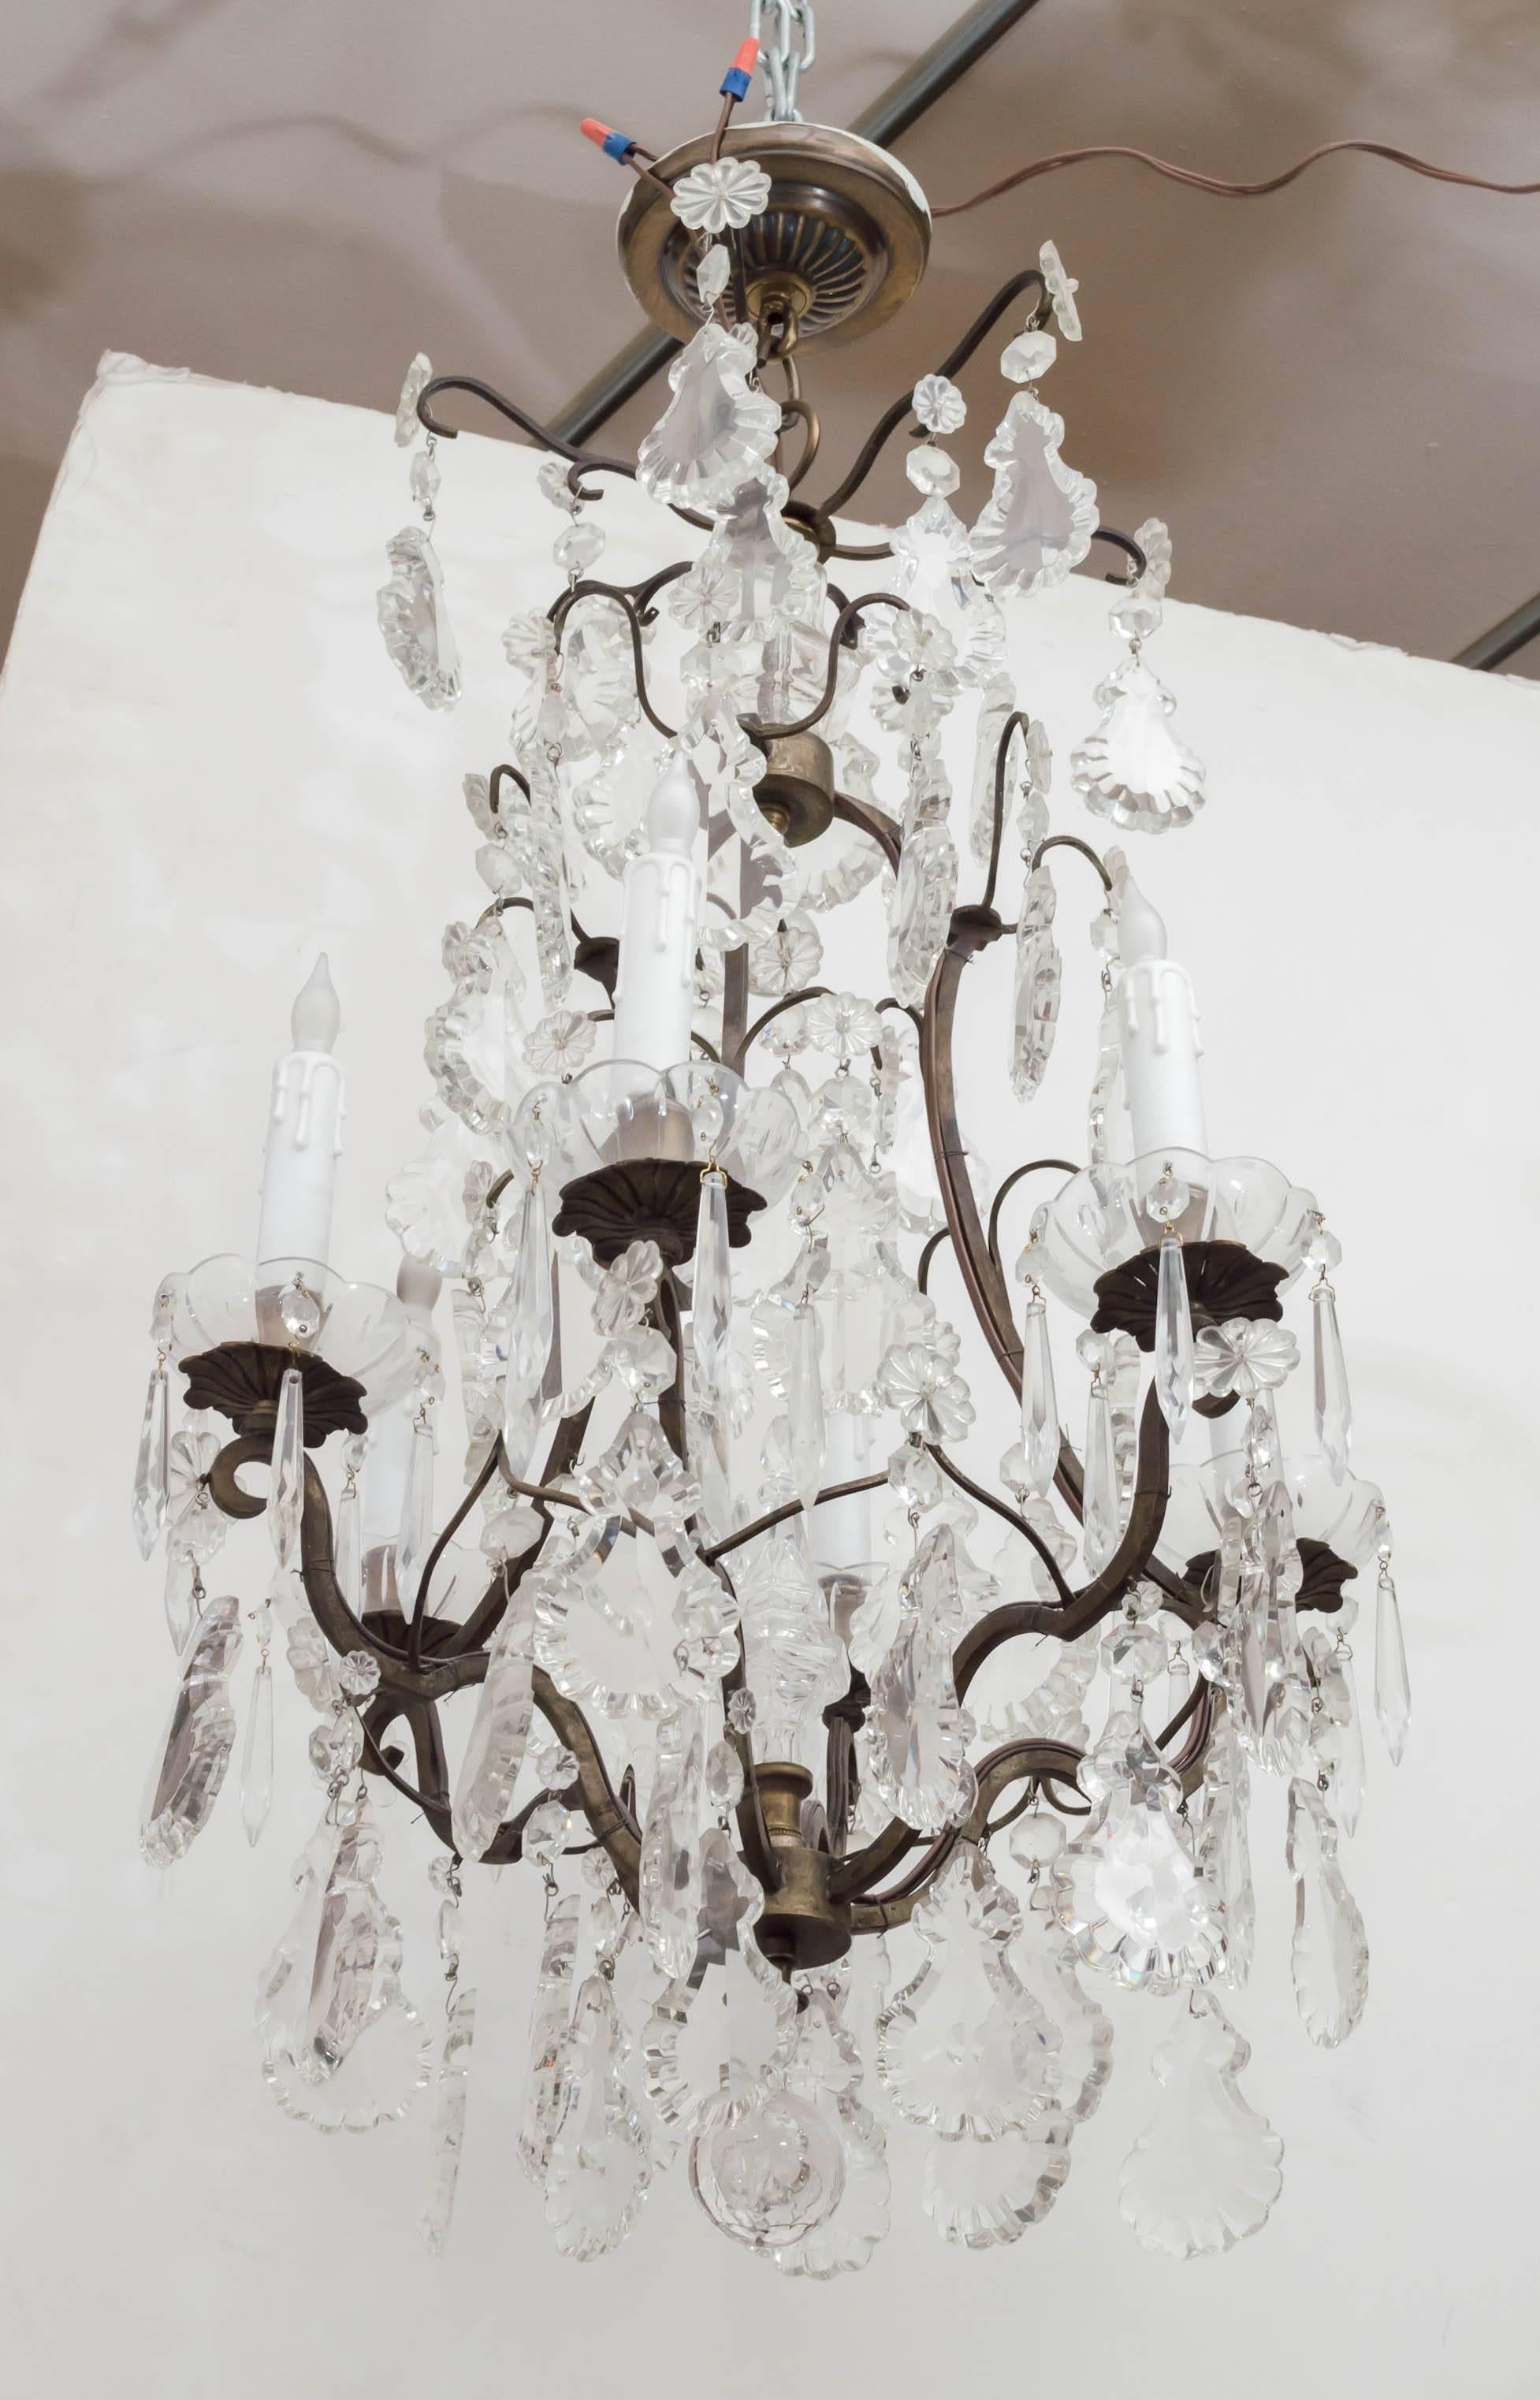 If you browse through our selection of antique lighting, you won't see any crystal chandeliers. We buy very little of them. This one caught our attention. It's the right size, has the large crystal segments, and is definitely an antique. Probably